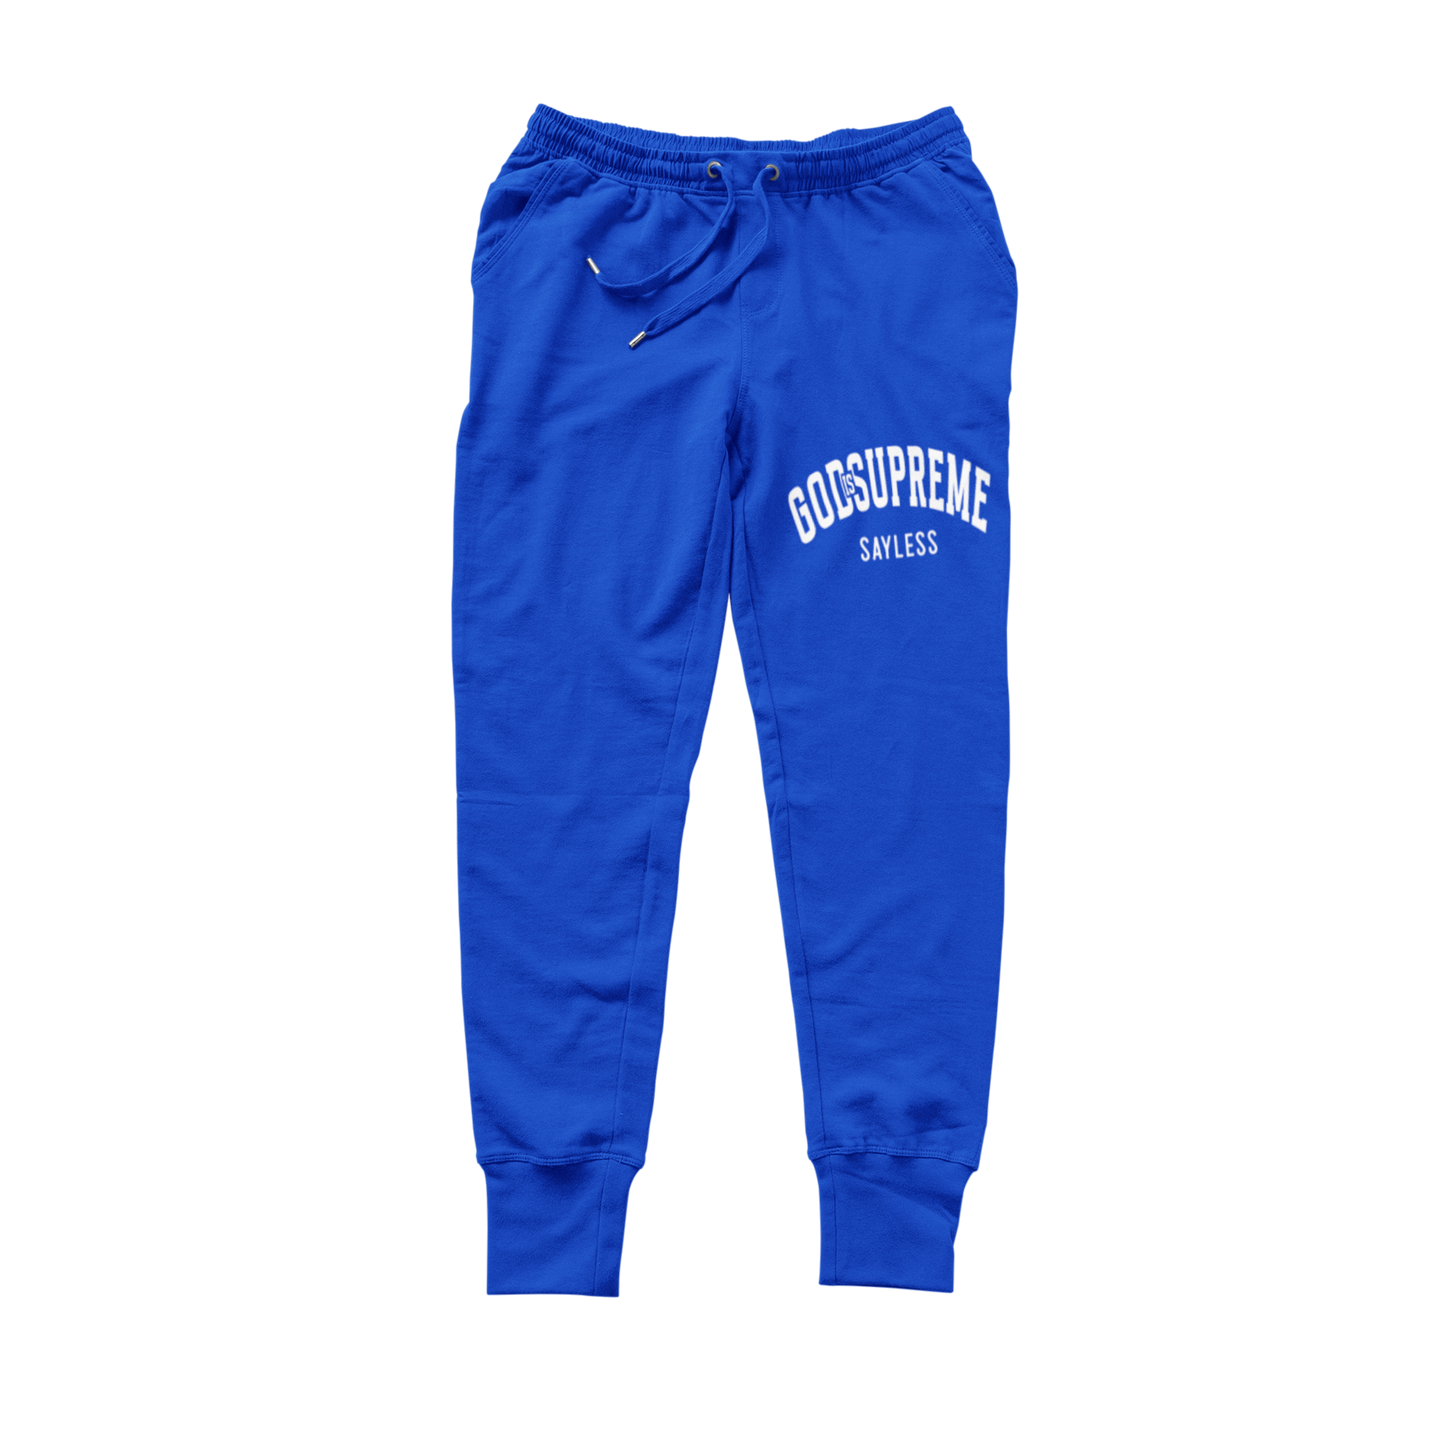 God is Supreme Sayless /White and Royal Blue Joggers